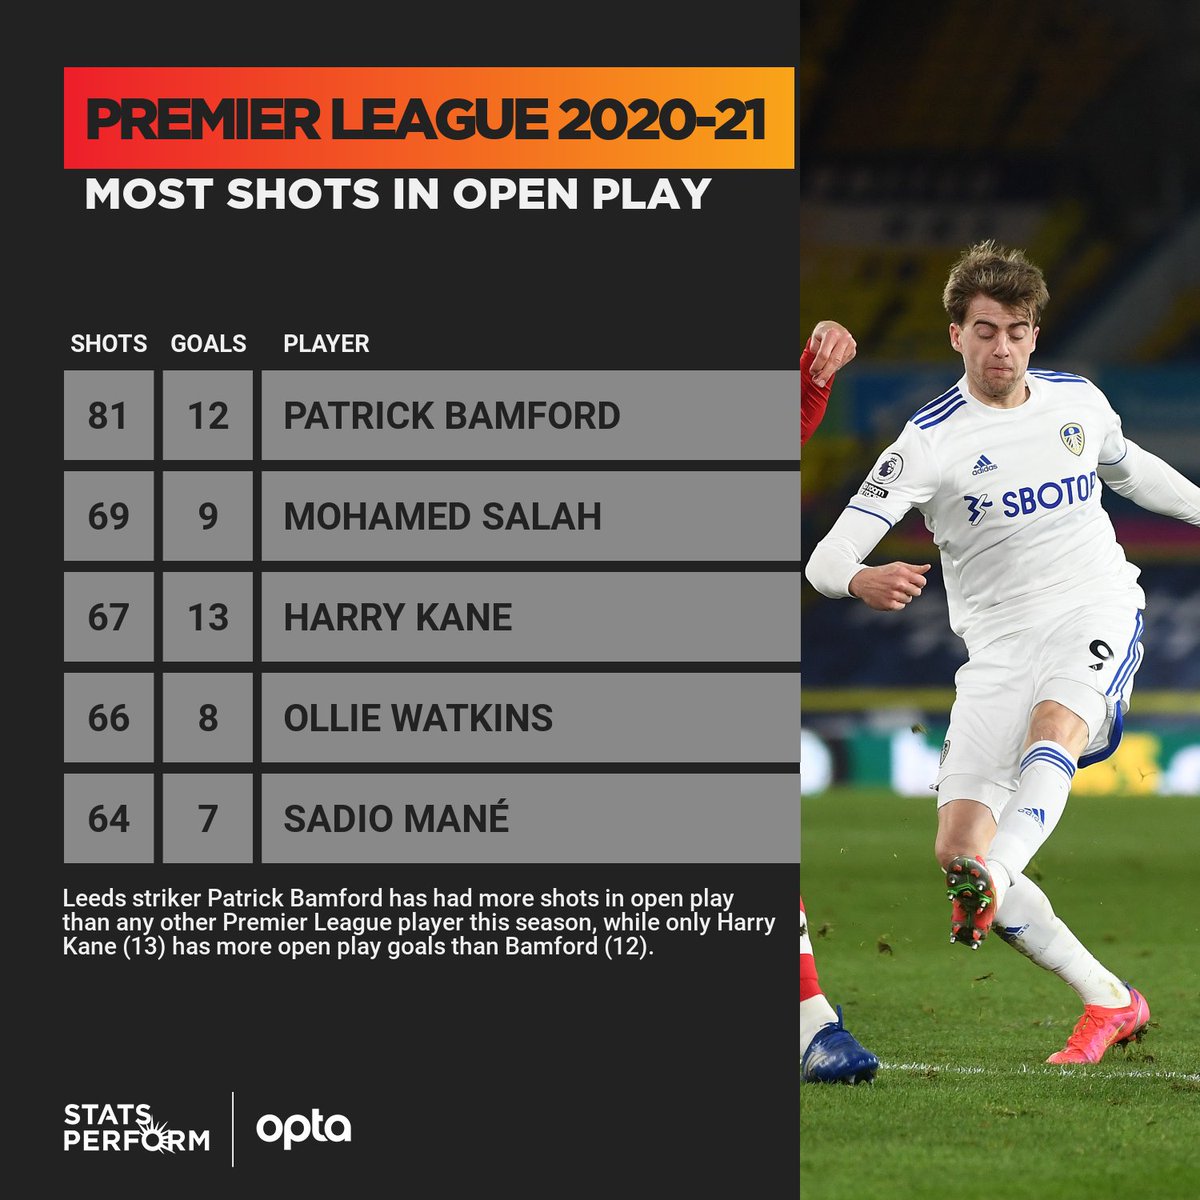 Optajoe 81 Patrick Bamford Has Had More Shots In Open Play In The Premier League This Season Than Anyone Else 81 While Only Harry Kane 13 Has More Goals